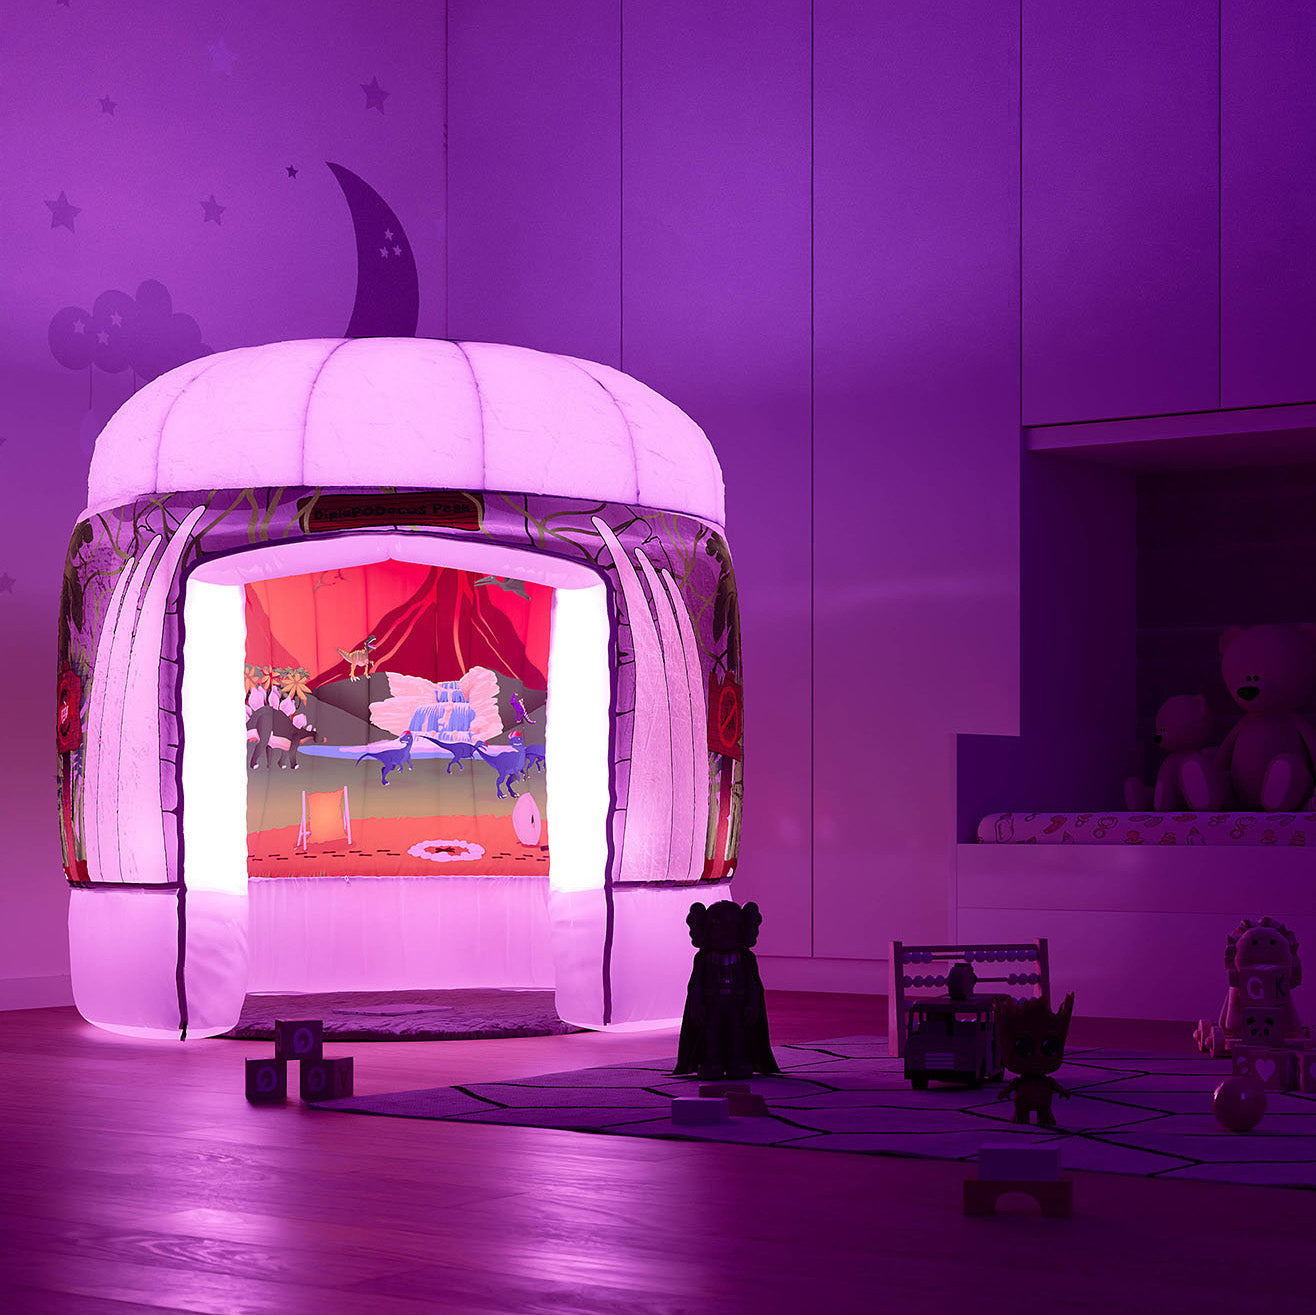 Mobile Pop-Up Retail & Event Pods